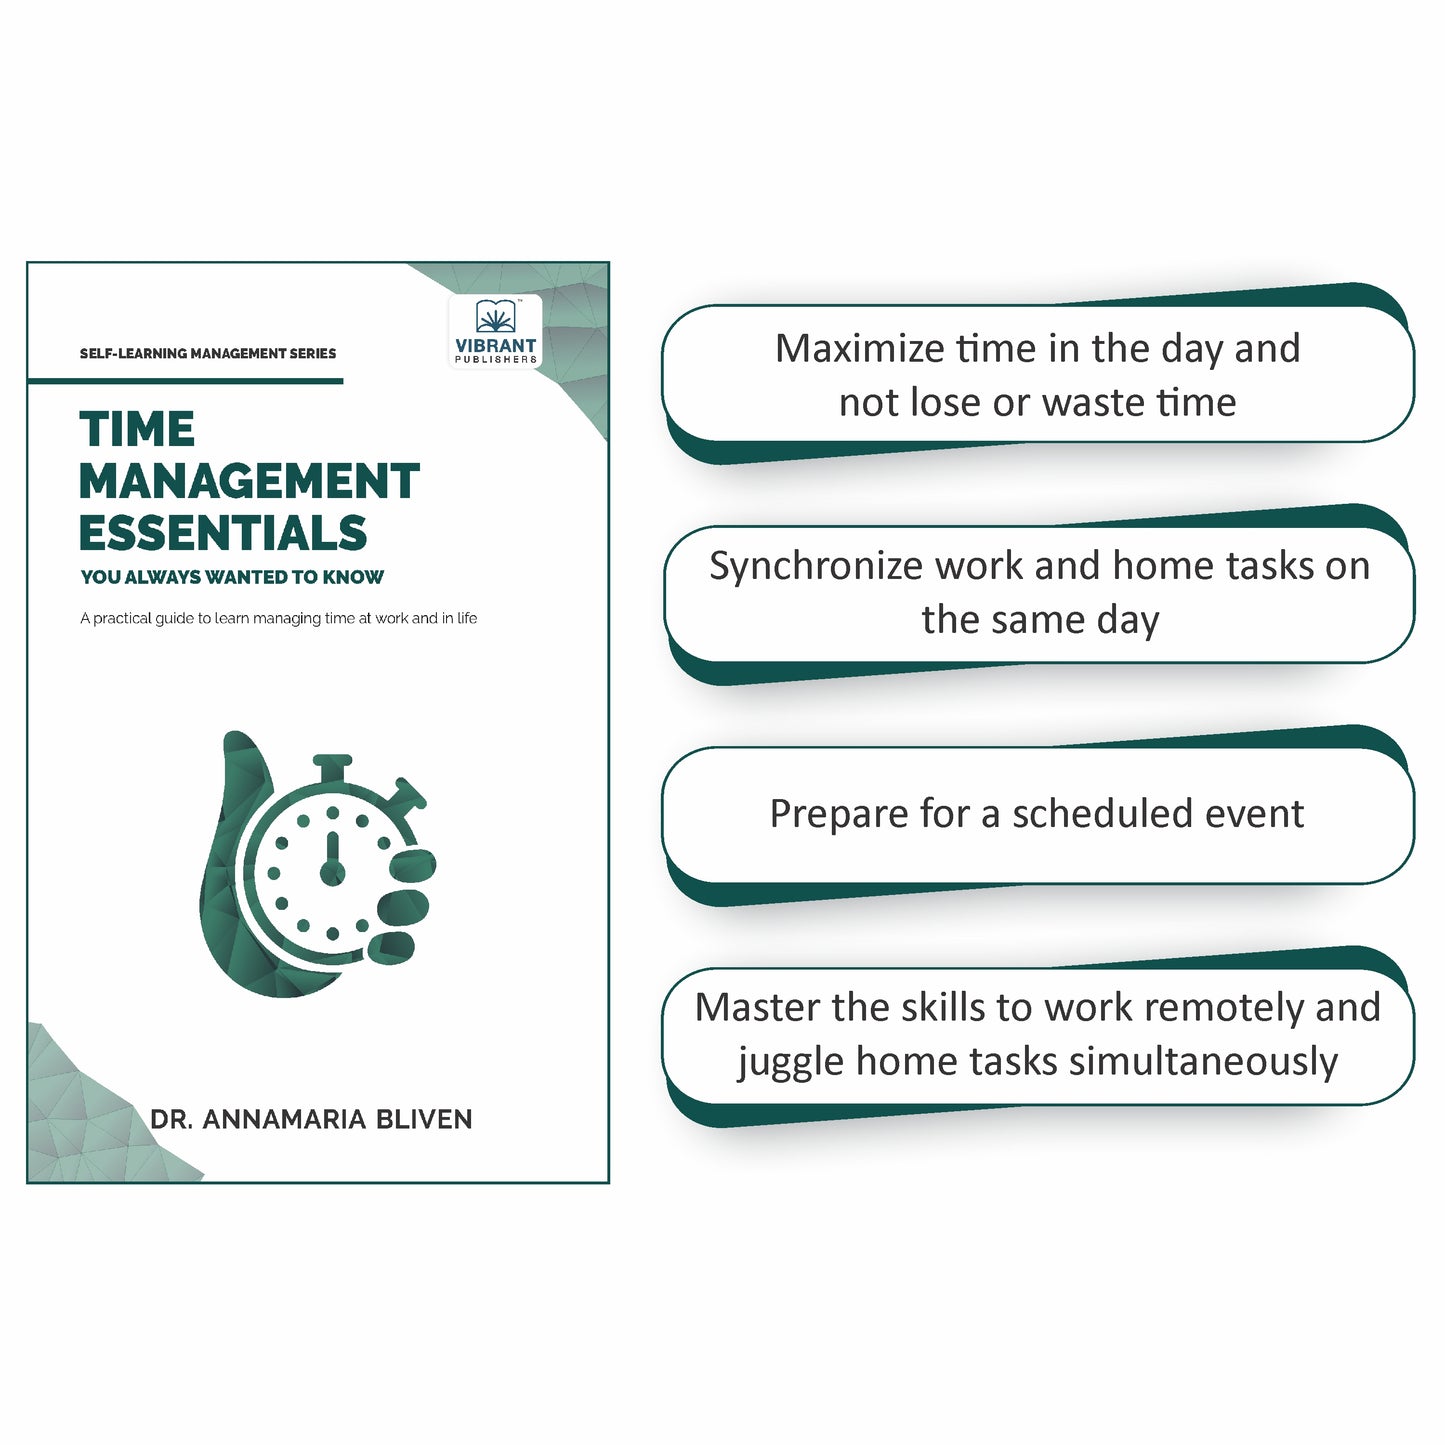 Time Management, Decision Making, and Leadership Essentials